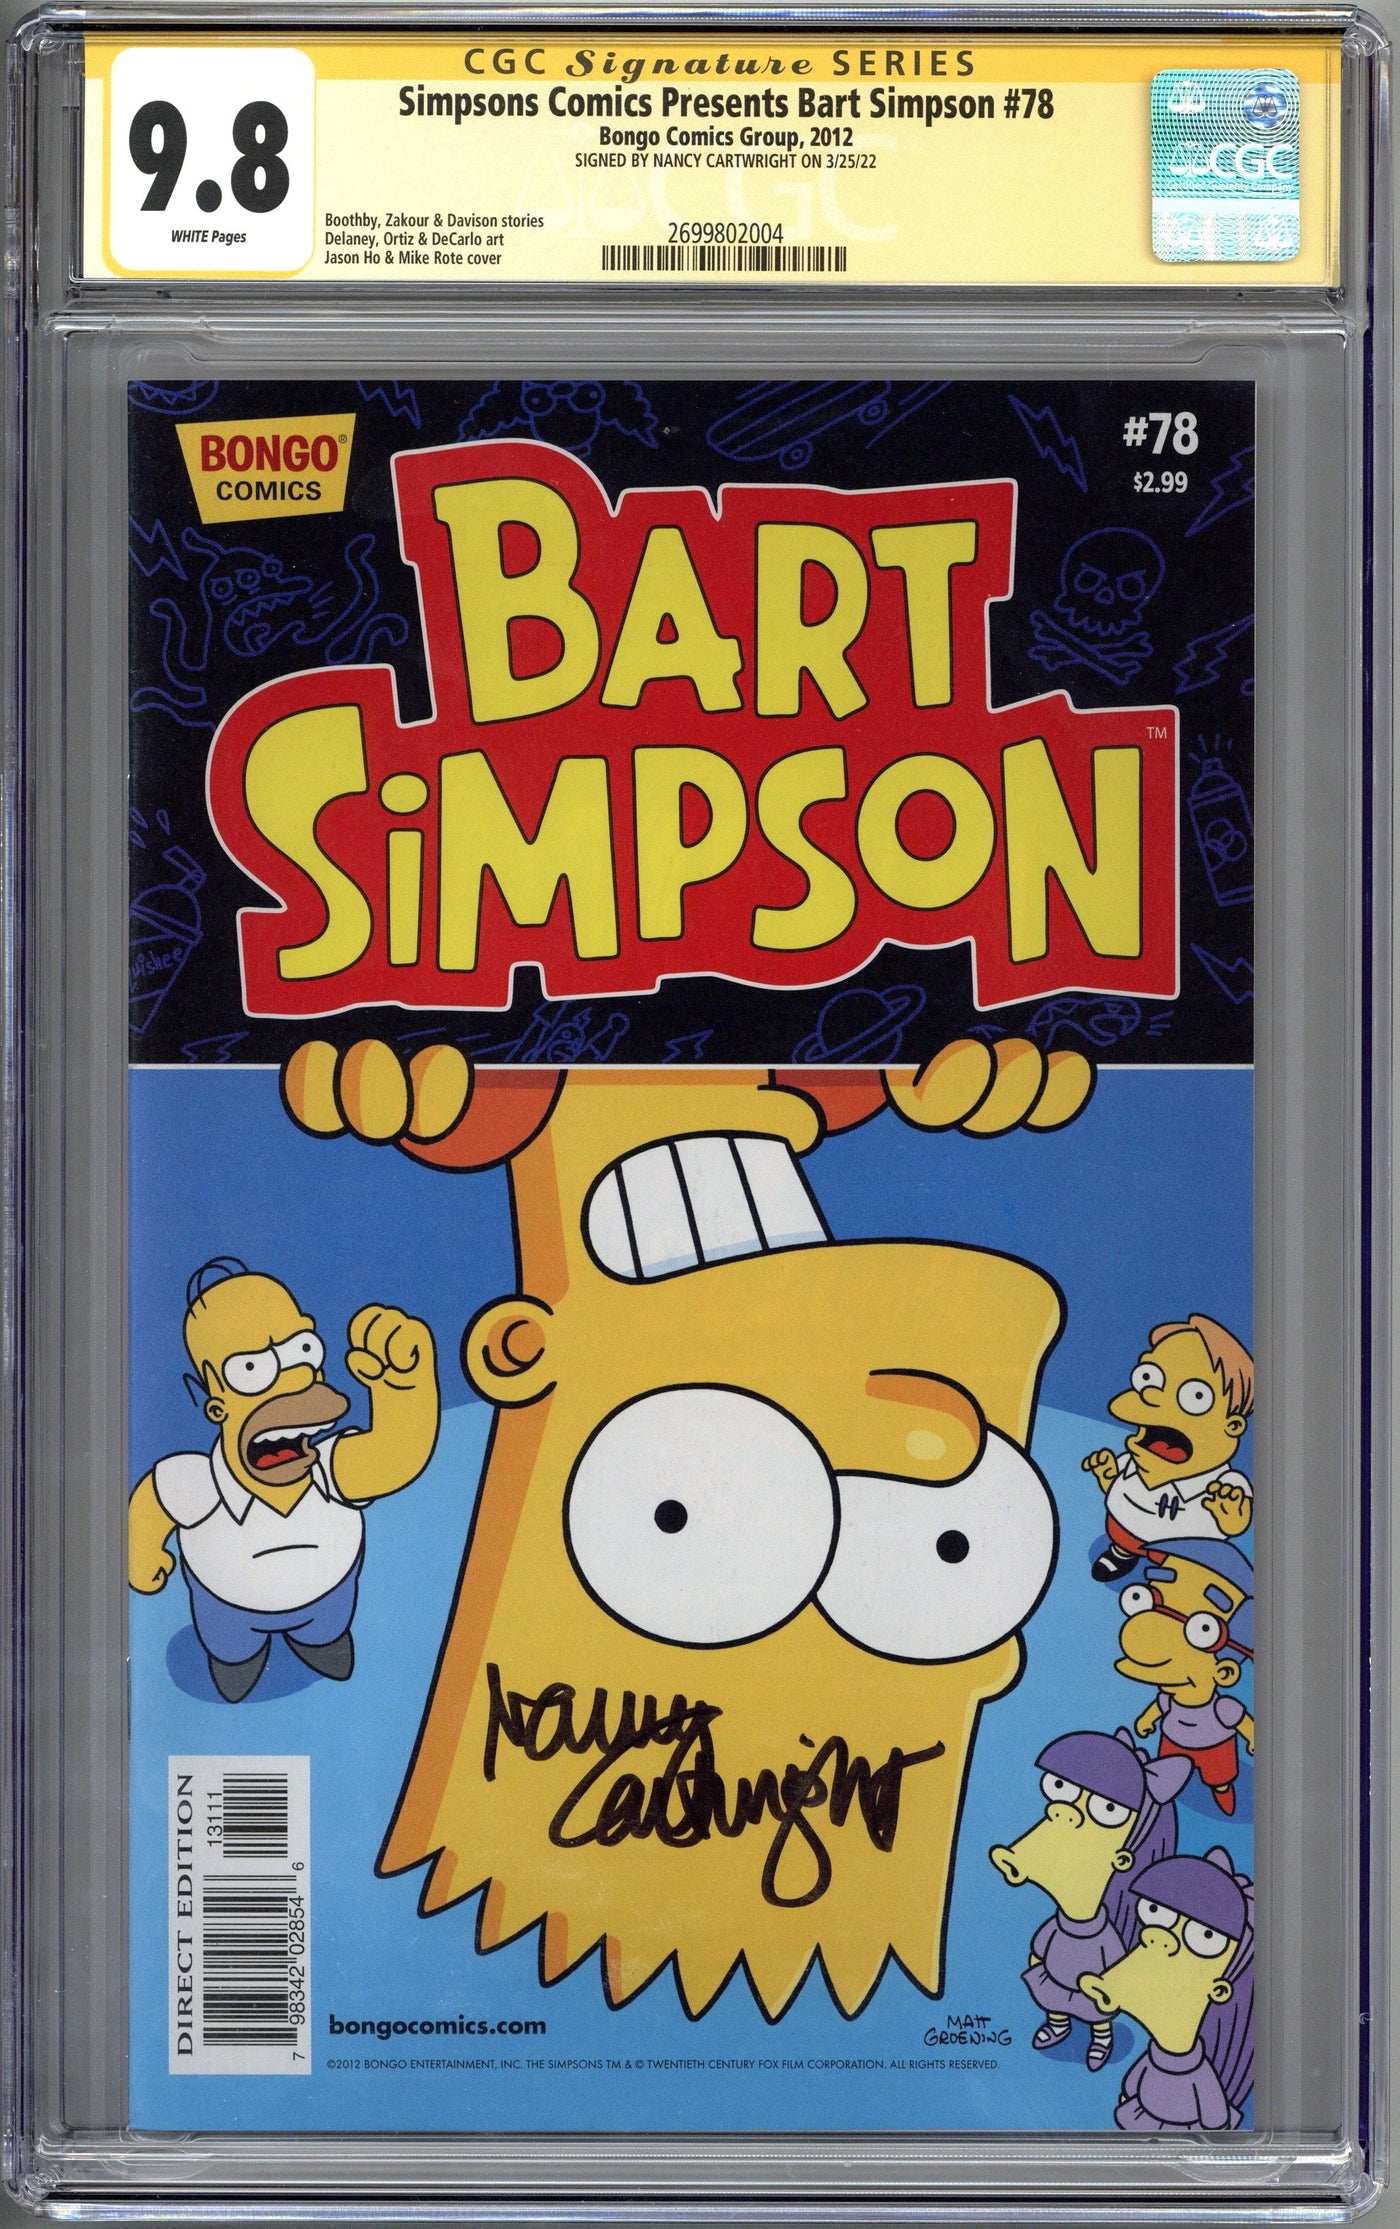 NANCY CARTWRIGHT SIGNED BART SIMPSON COMIC BOOK CGC 9.8 AUTOGRAPHED NC8